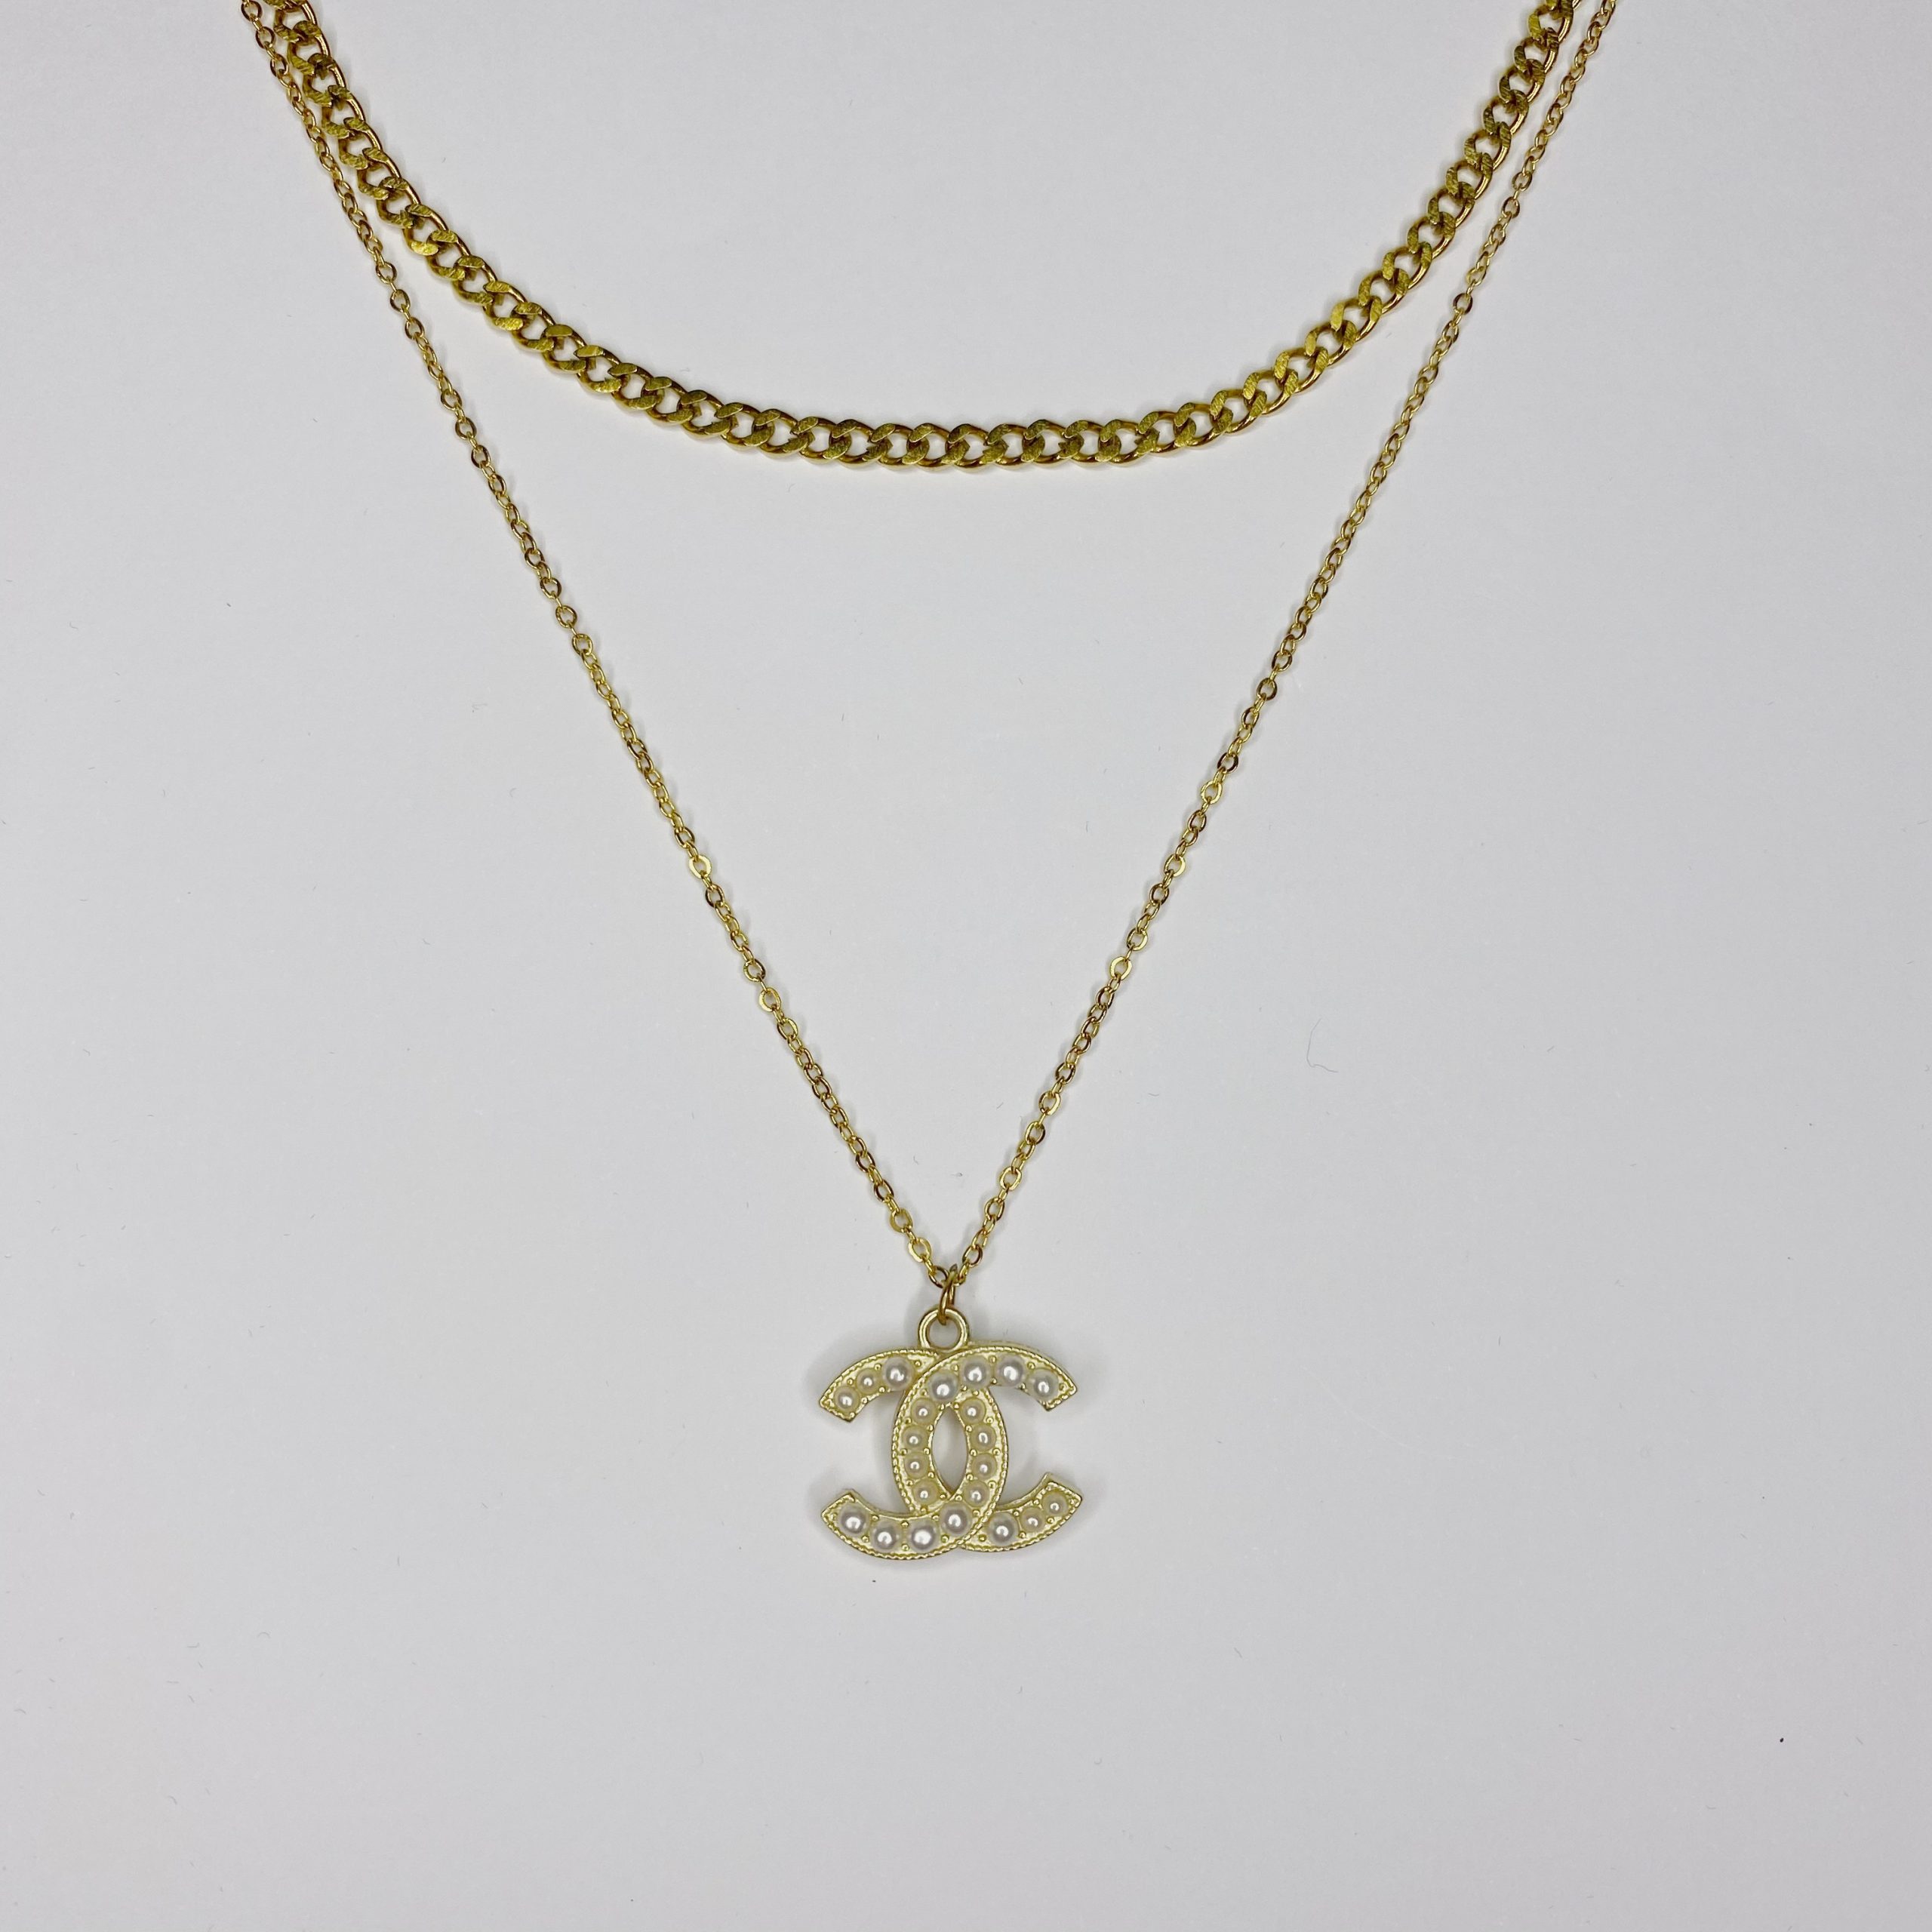 Vintage chanel rework necklace, Women's Fashion, Jewelry & Organisers,  Necklaces on Carousell